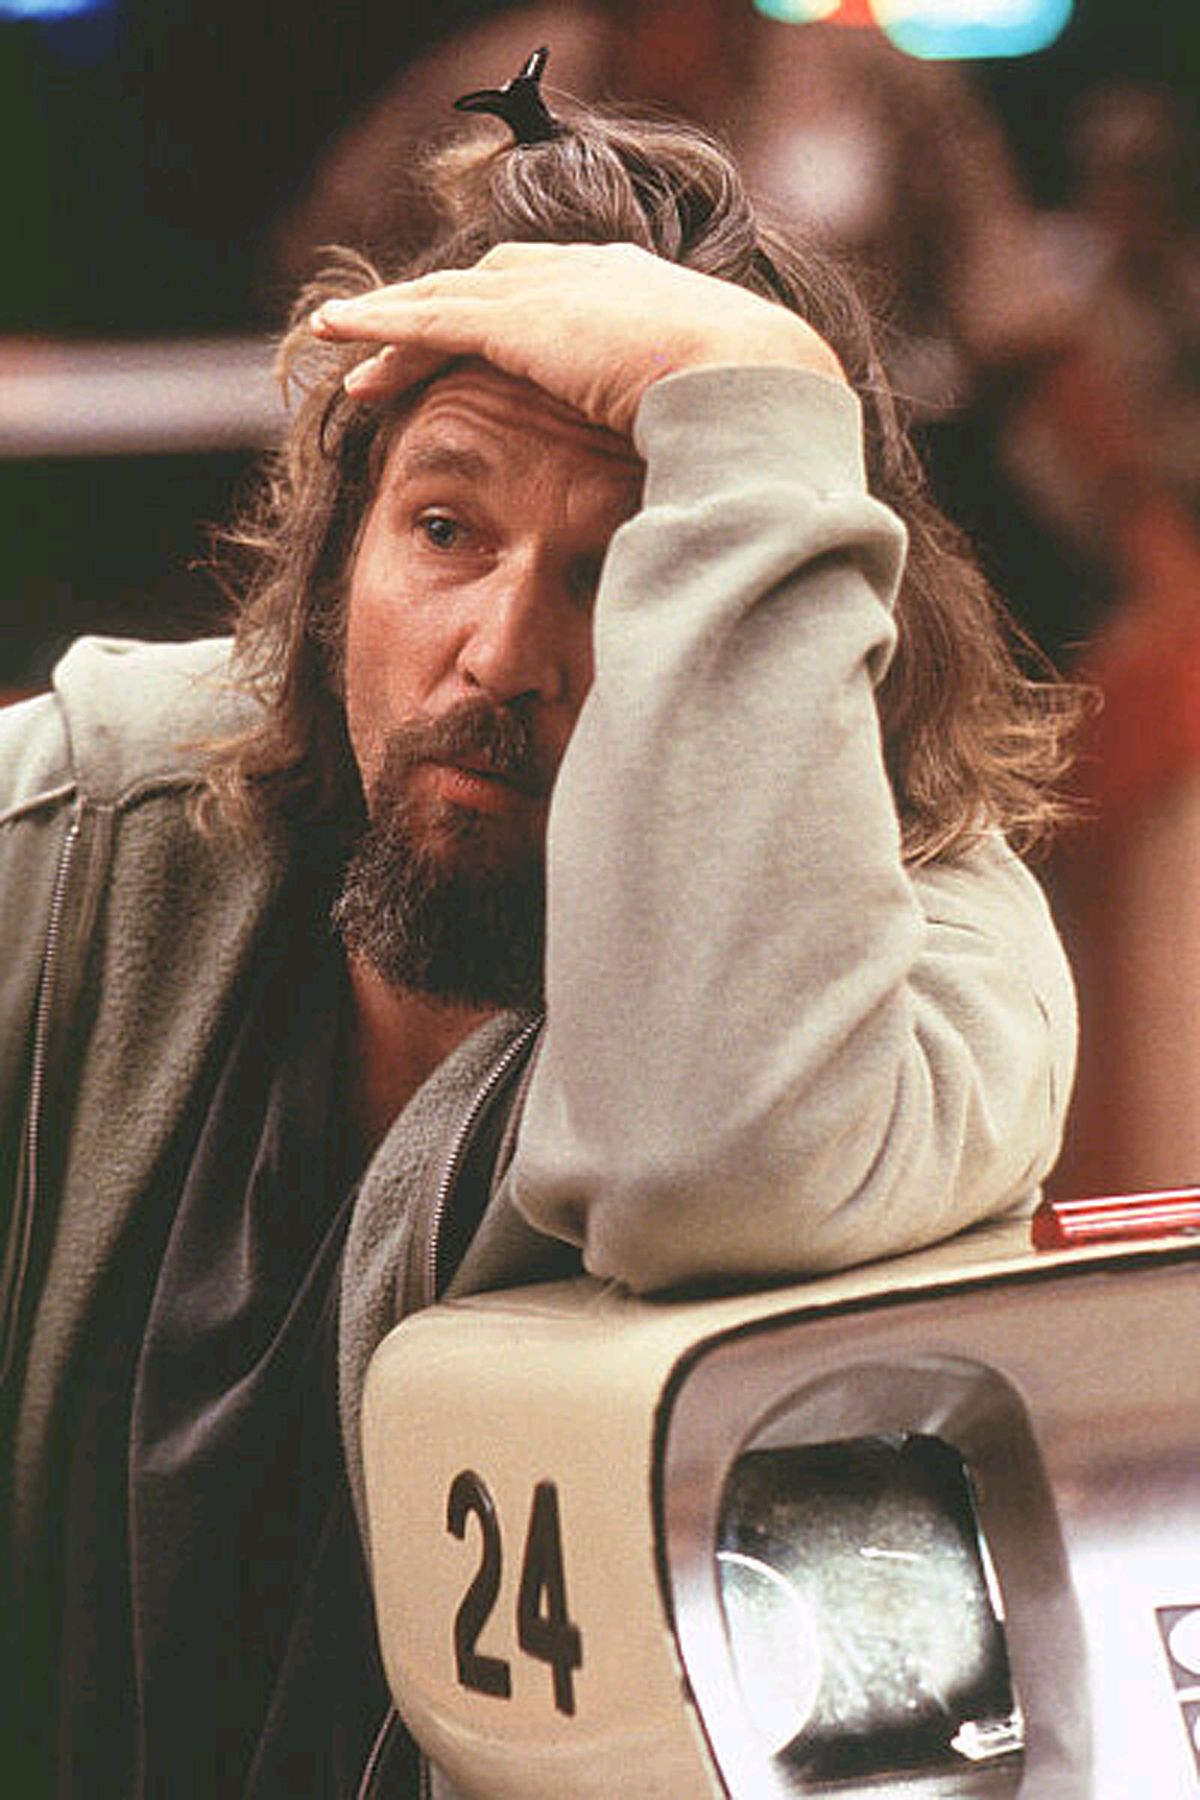 Jeff Bridges starred as the Dude in the Coen Brothers’ 1998 cult hit, “The Big Lebowski.”  Movieweb.com (Movieweb.com / The Spokesman-Review)